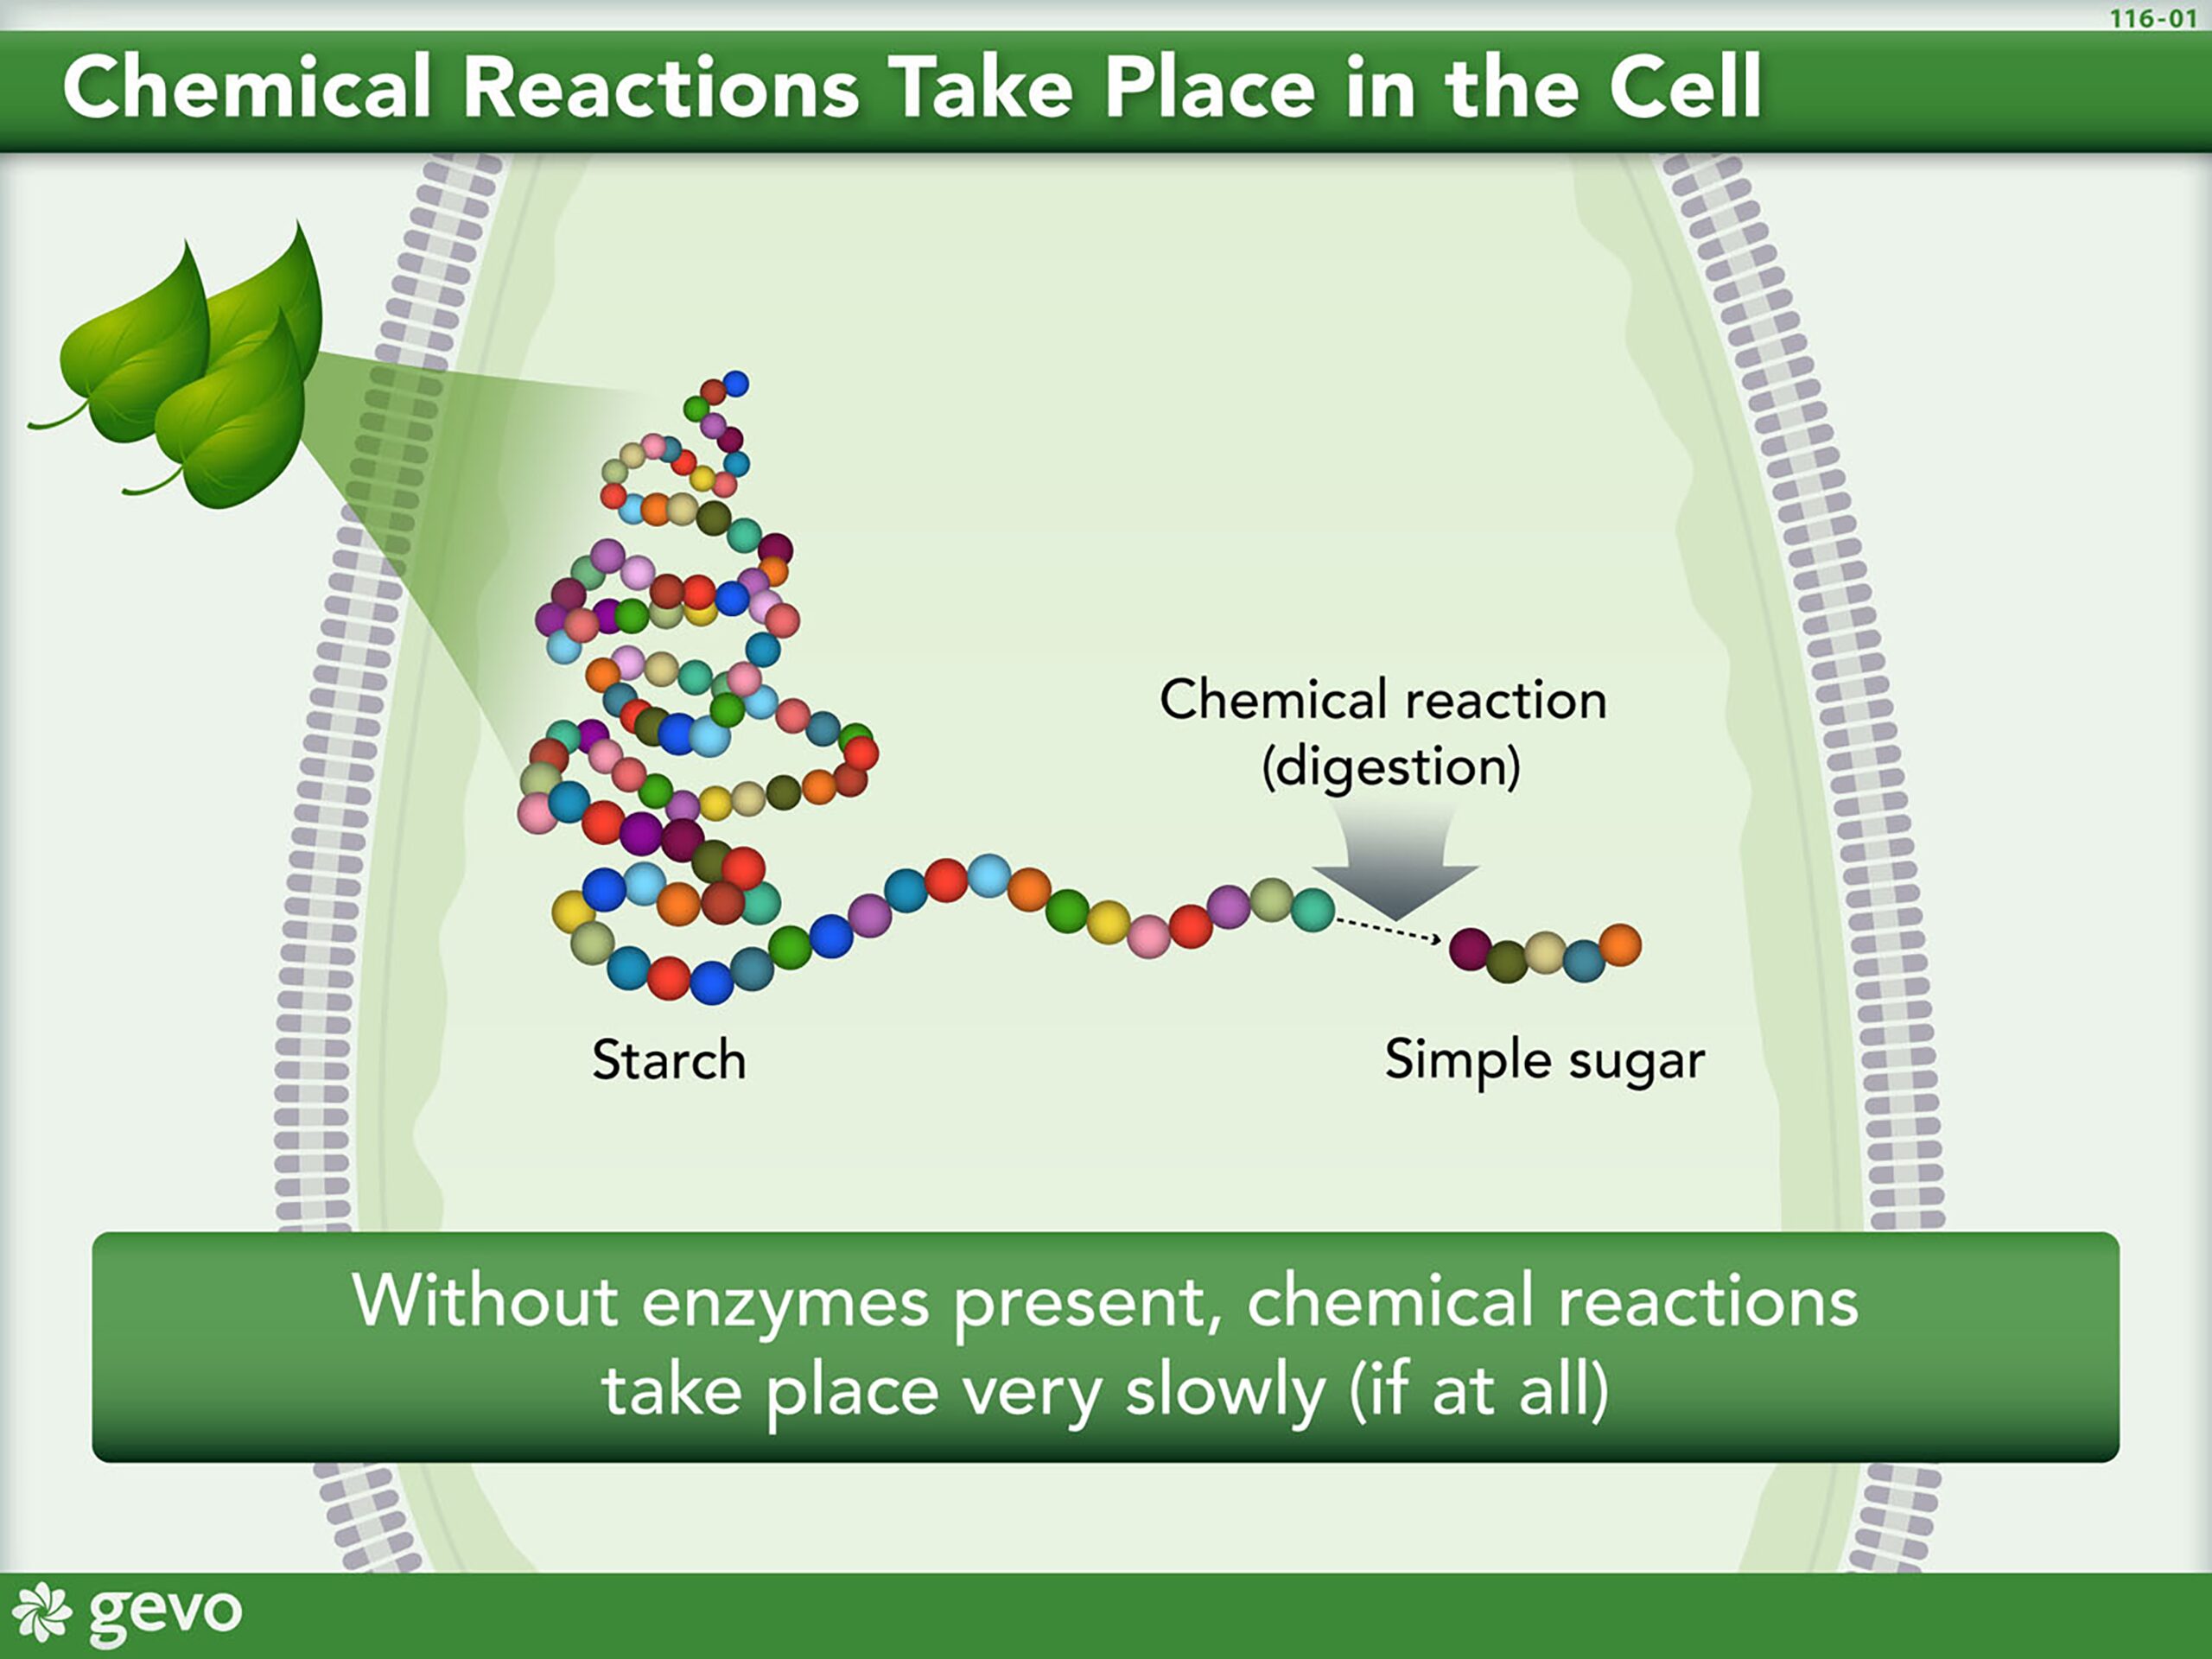 Illustration depicting that Chemical Reactions Take Place in the Cell. Without enzymes present, chemical reactions take place very slowly (if at all).